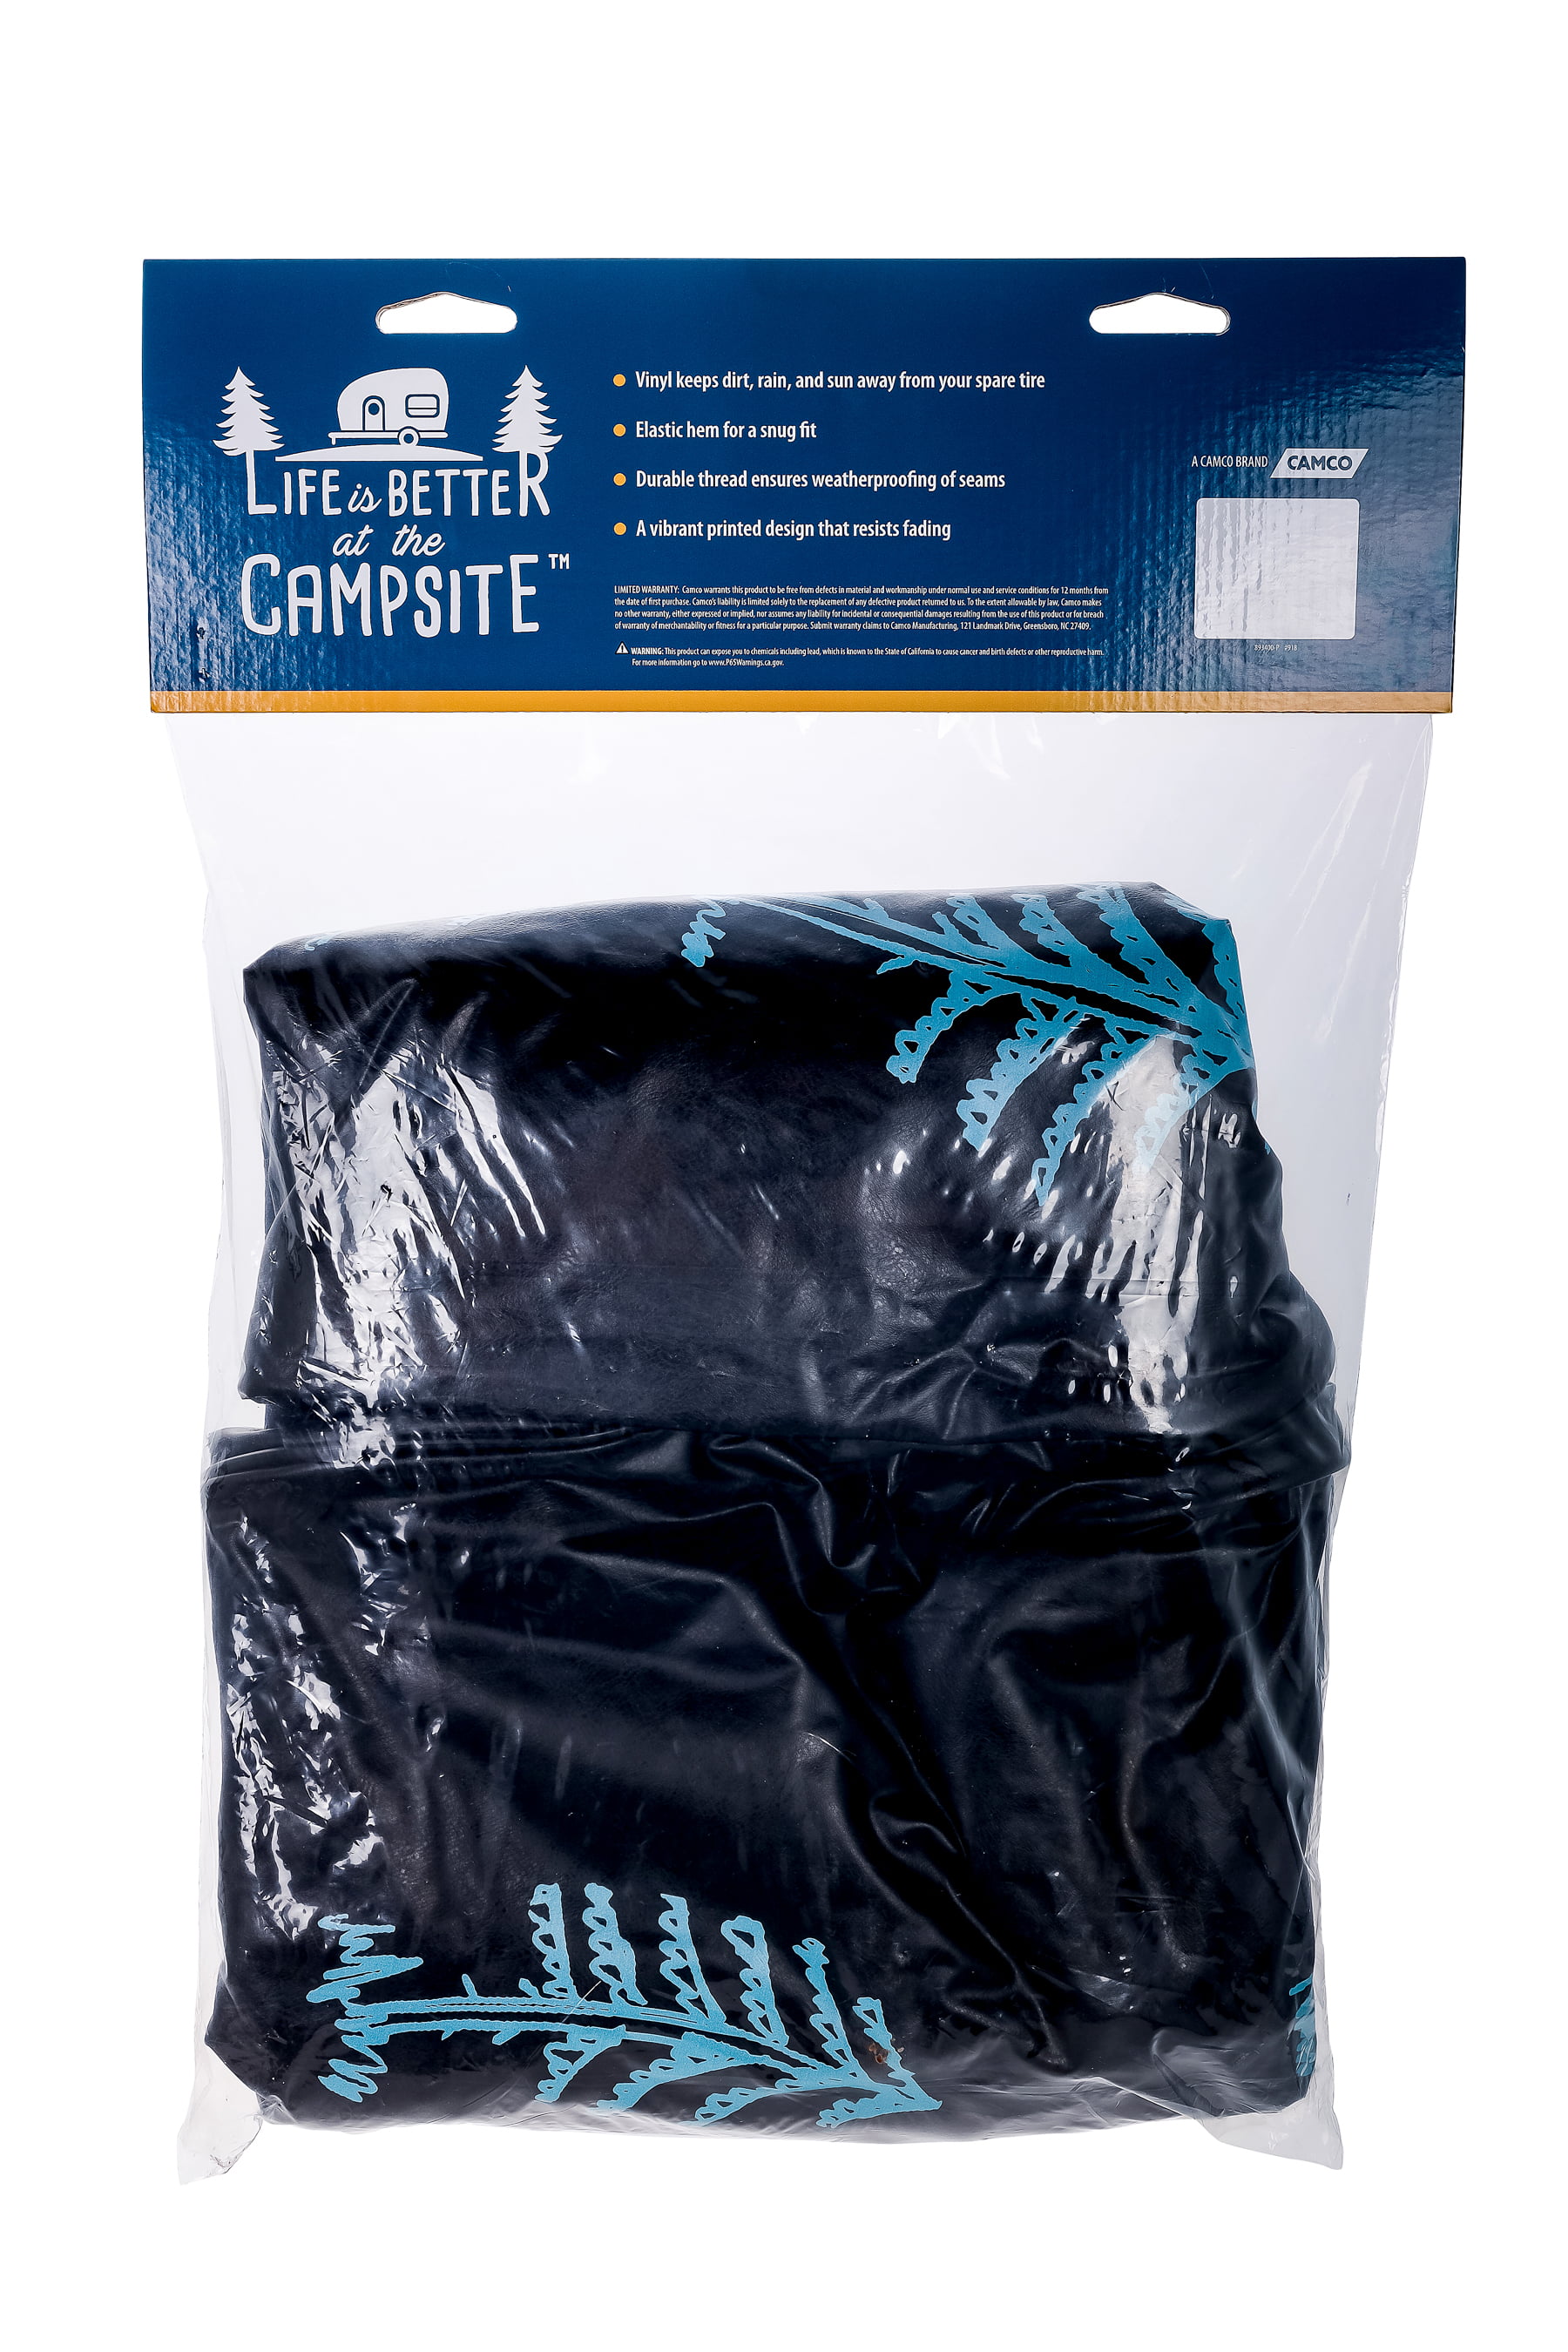 Camco Life is Better at Campsite 29 Vinyl Cover with Elastic Hem-Durable Design Keeps Dirt Rain and Sun Away from Your Spare Tire 53293 